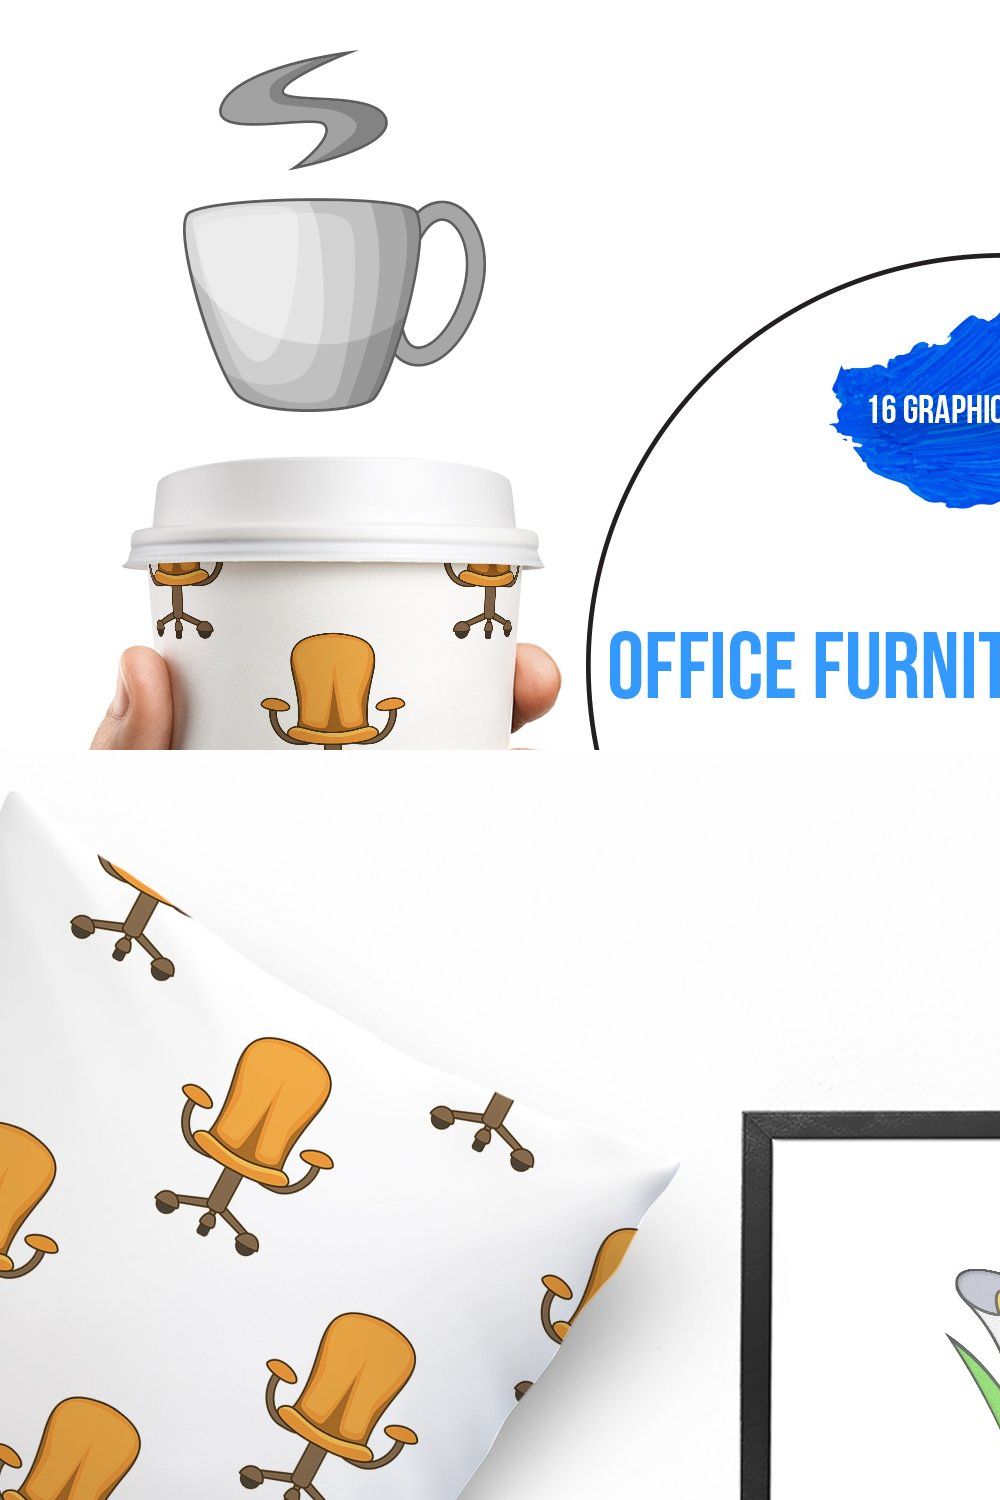 Office furniture interior icons set pinterest preview image.